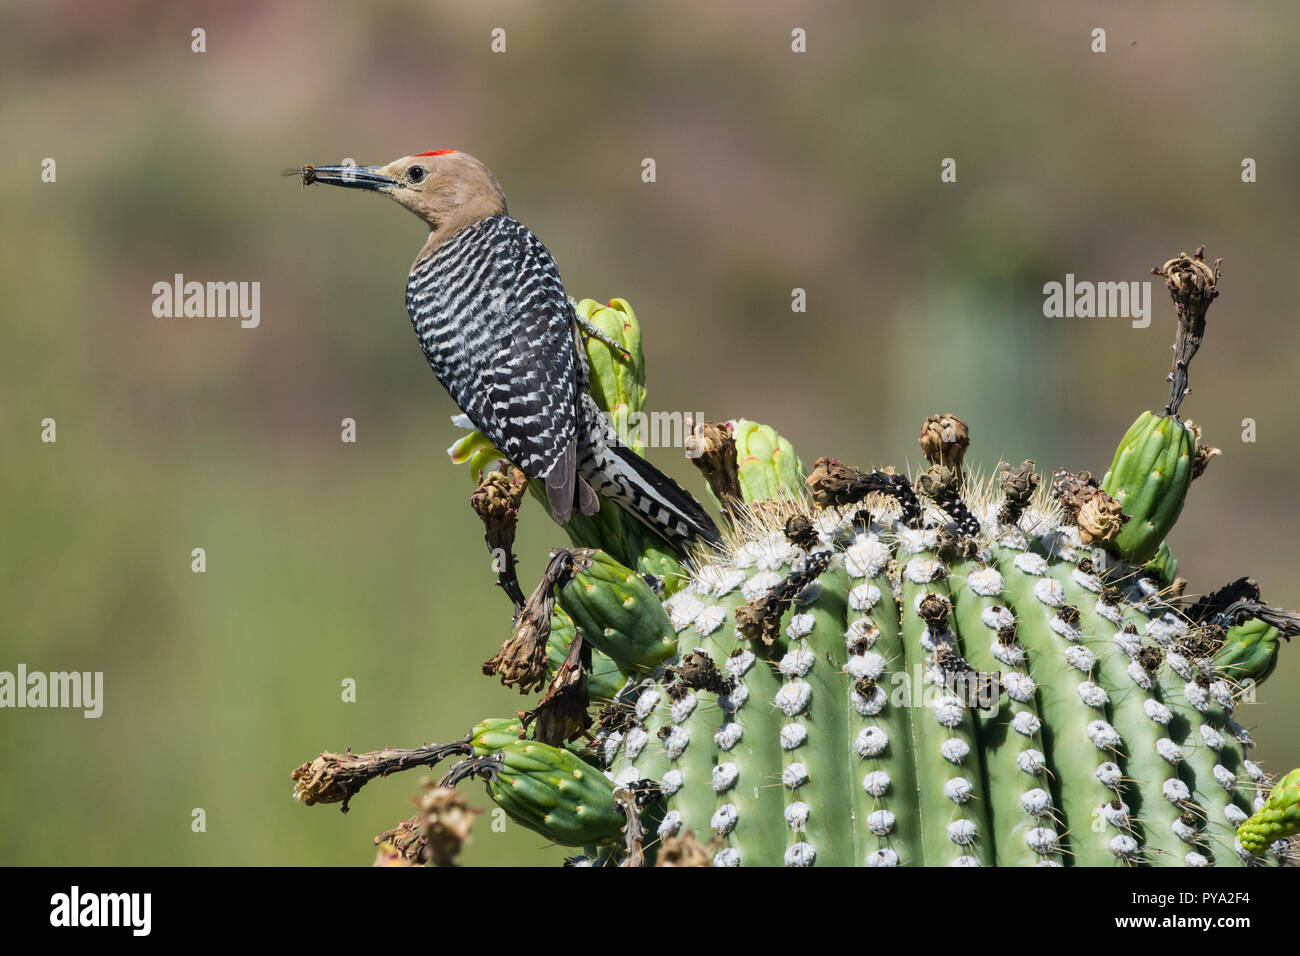 A male Gila Woodpecker (Melanerpes uropygialis) perched on the flower buds of a Saguaro (Carnegiea gigantea) with a honey bee, that he will take to fe Stock Photo